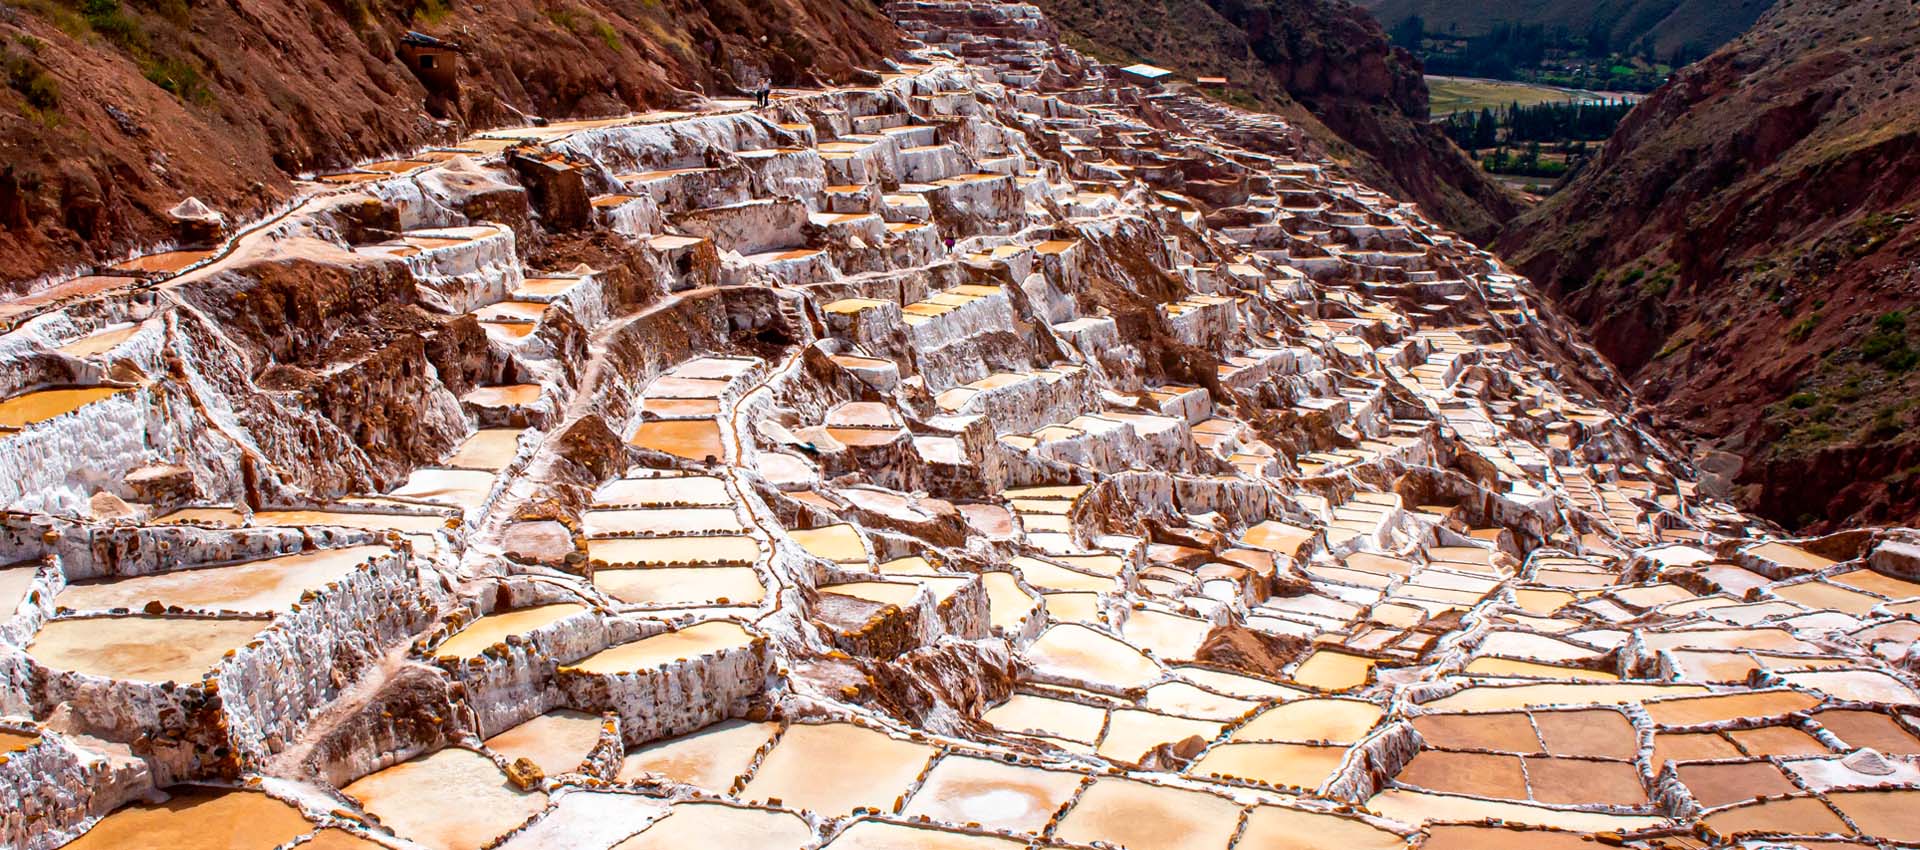 Sacred Valley Tour with Moray and Salt Mines Included! - Orange Nation Peru